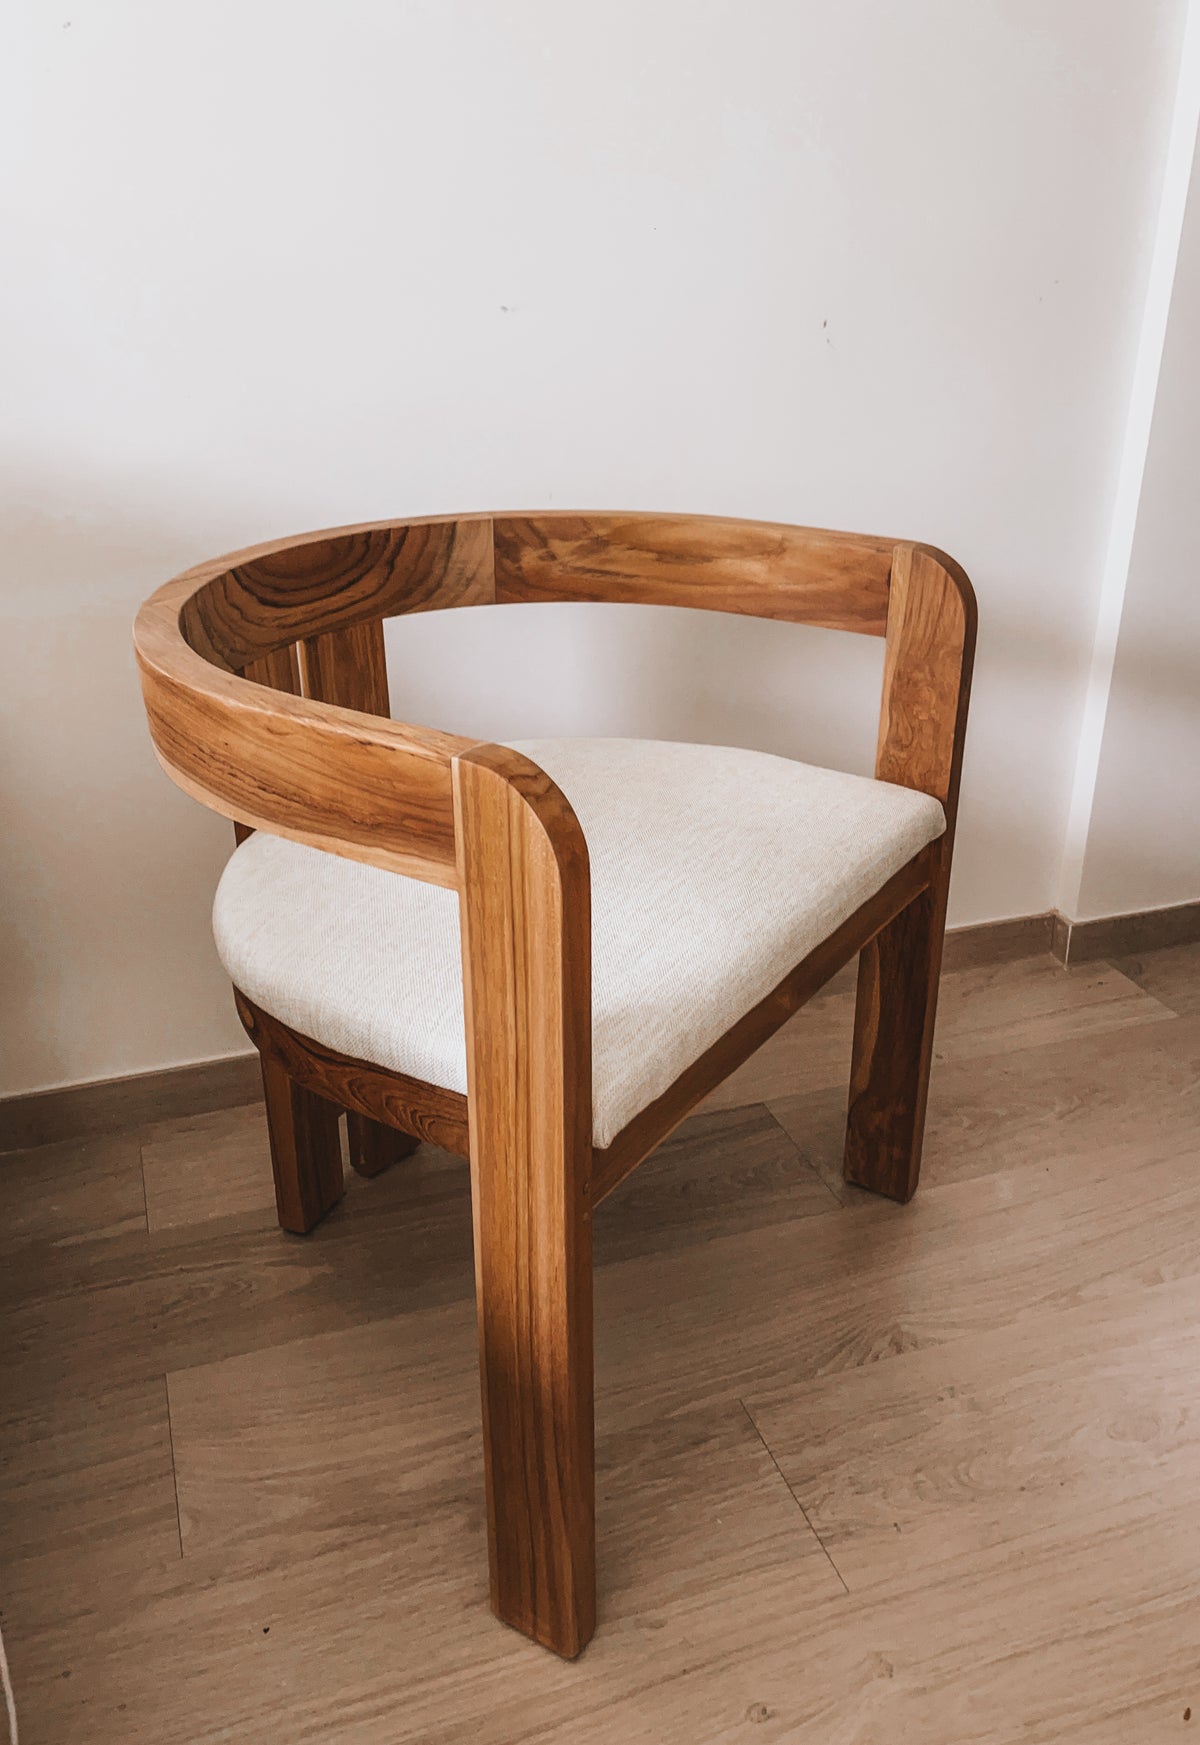 Pigreco dining chair